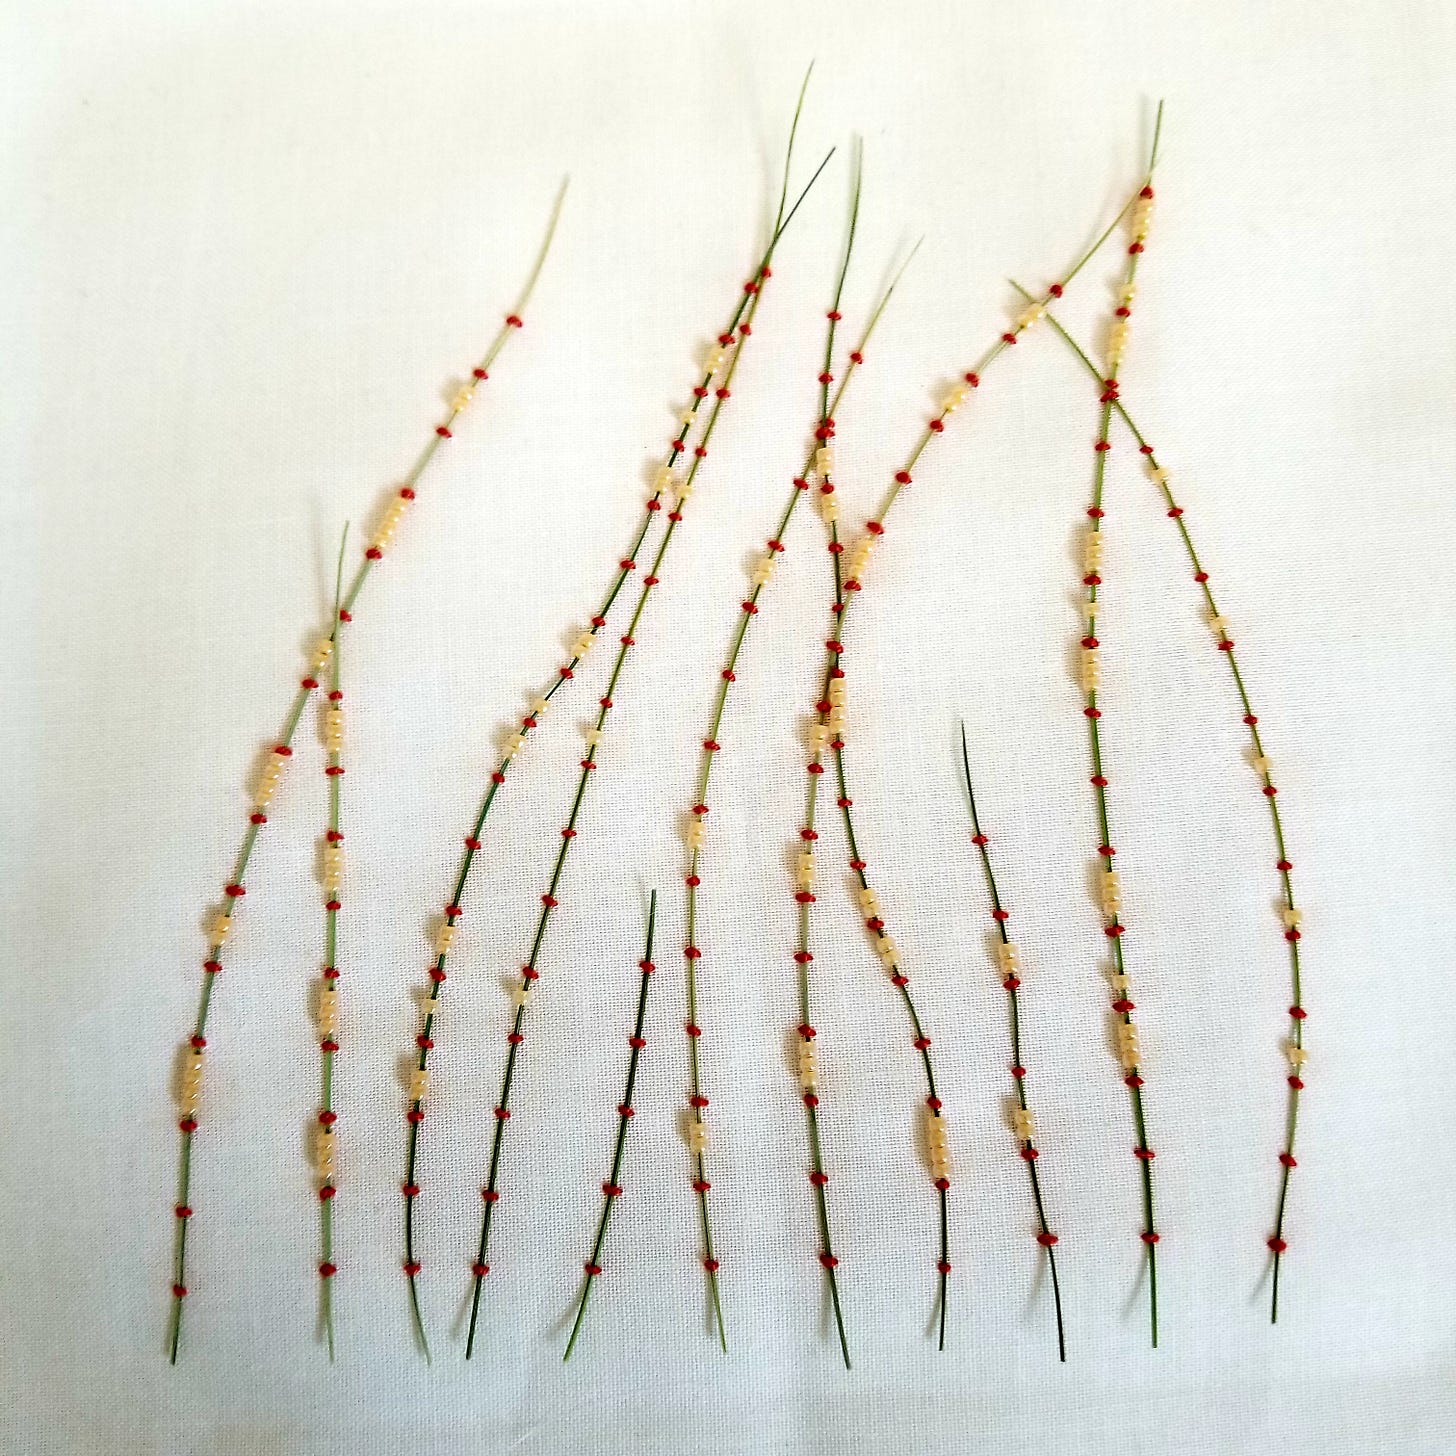 dried grass couched to muslin fabric with pink thread and peach glass beads